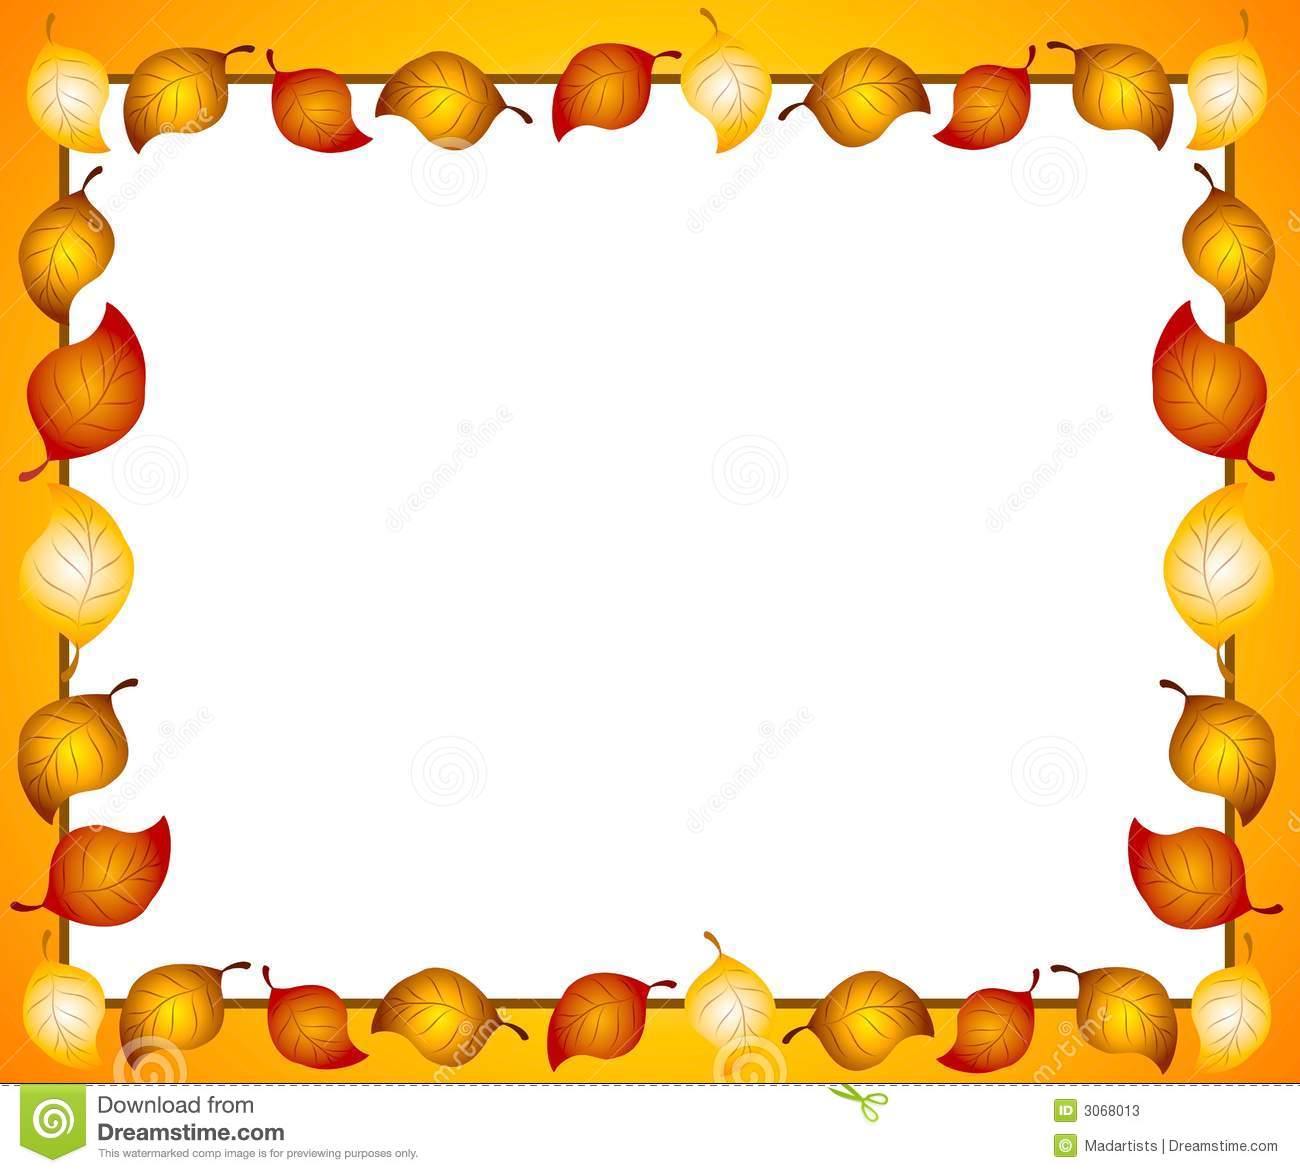 Clip Art Illustration Of An Arrangement Of Autumn Leaves In Red